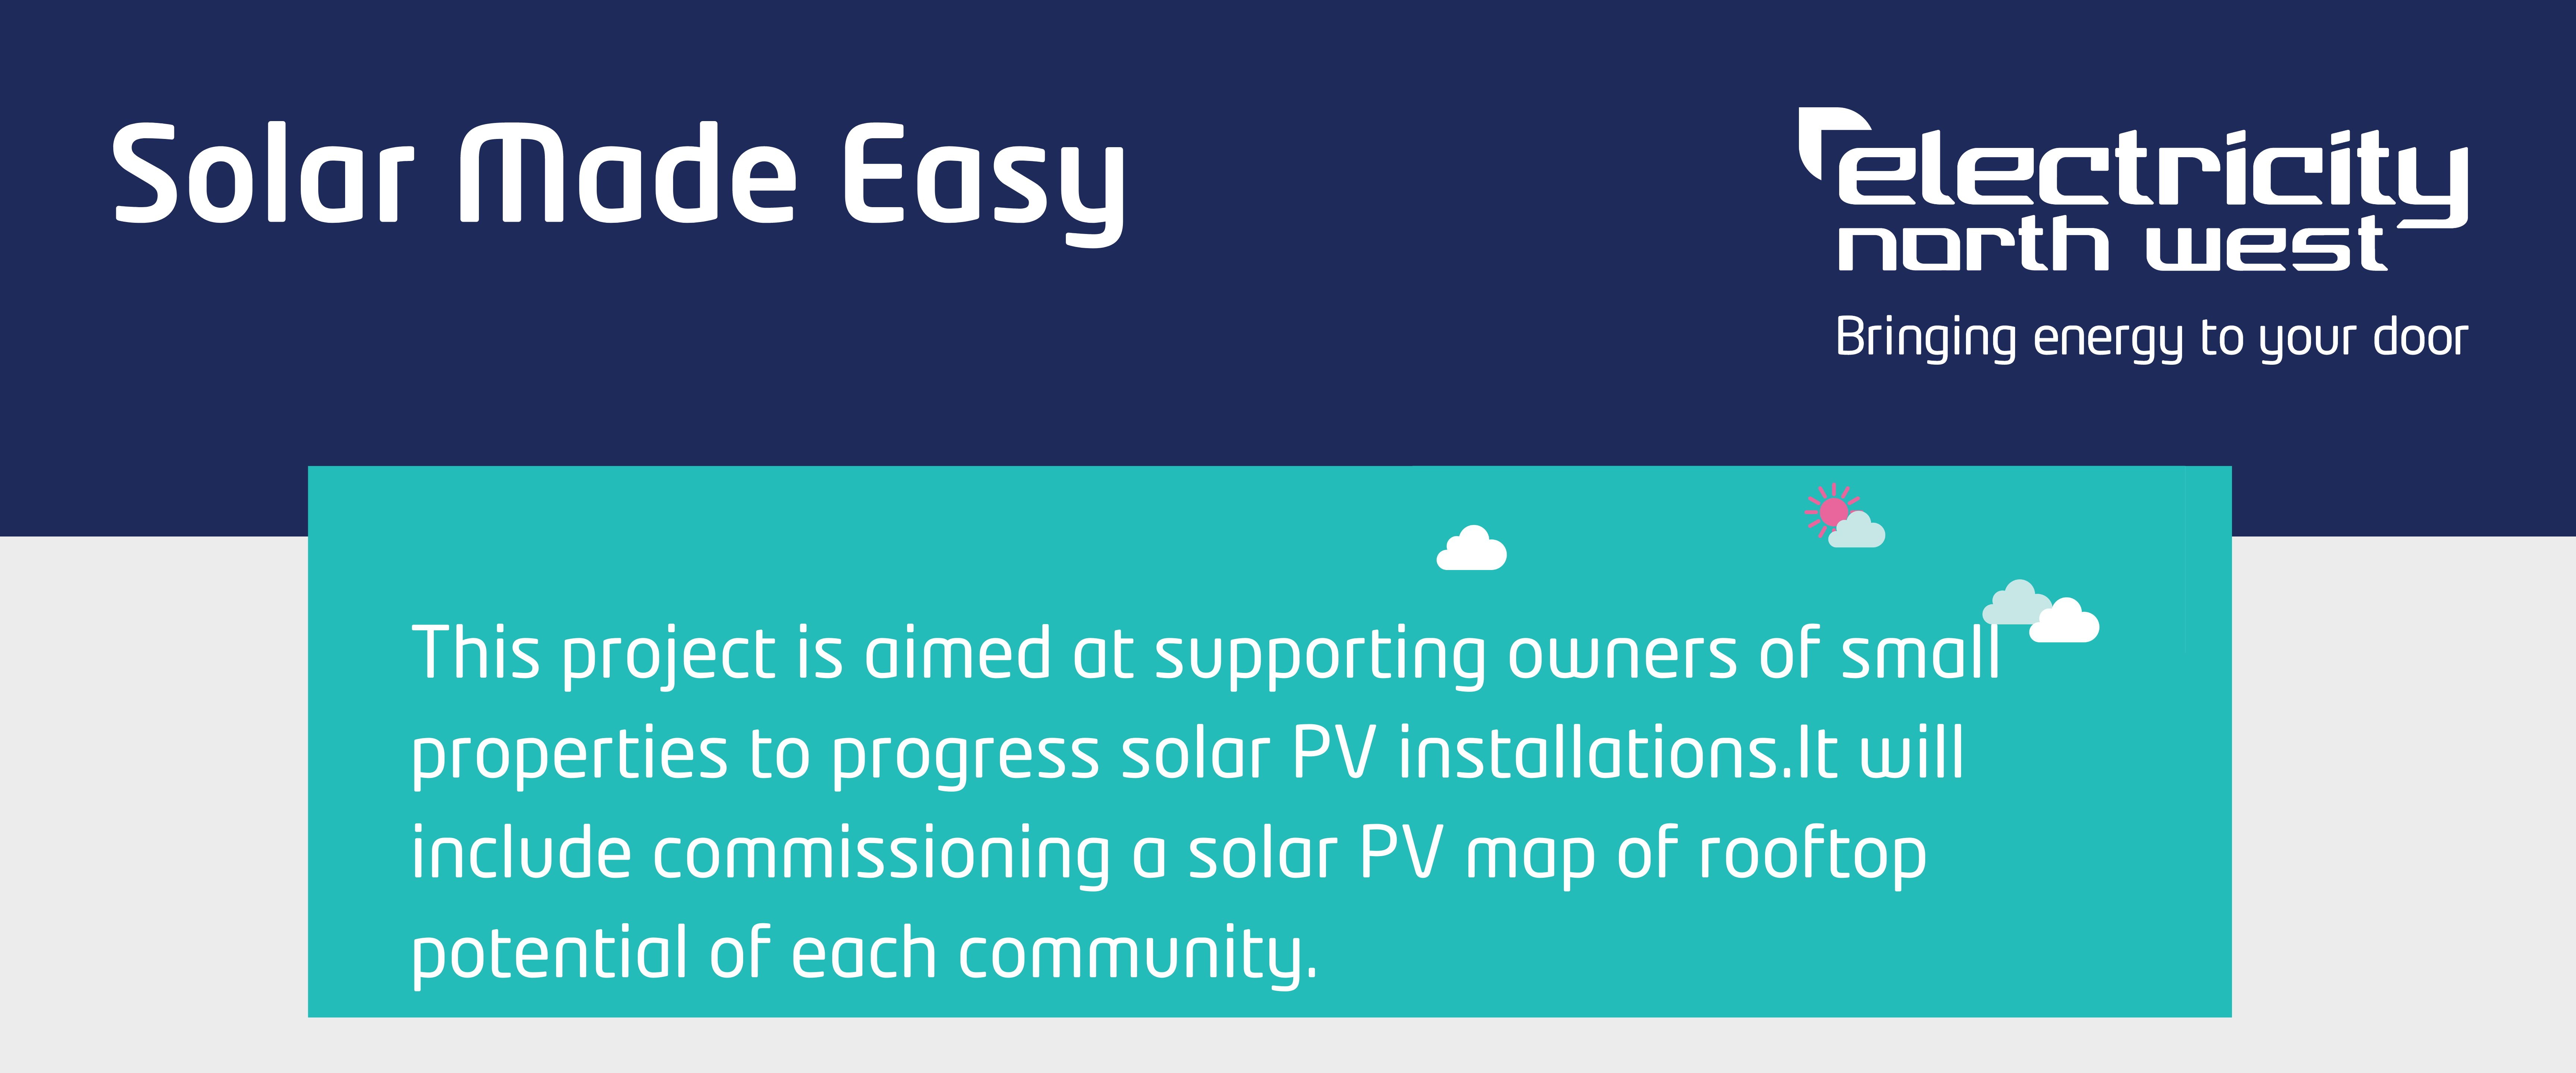 Solar Made Easy, This project is aimed at supporting owners of small properties to progress solar PV installations.  It will include commissioning a solar PV map of rooftop potential of each community
